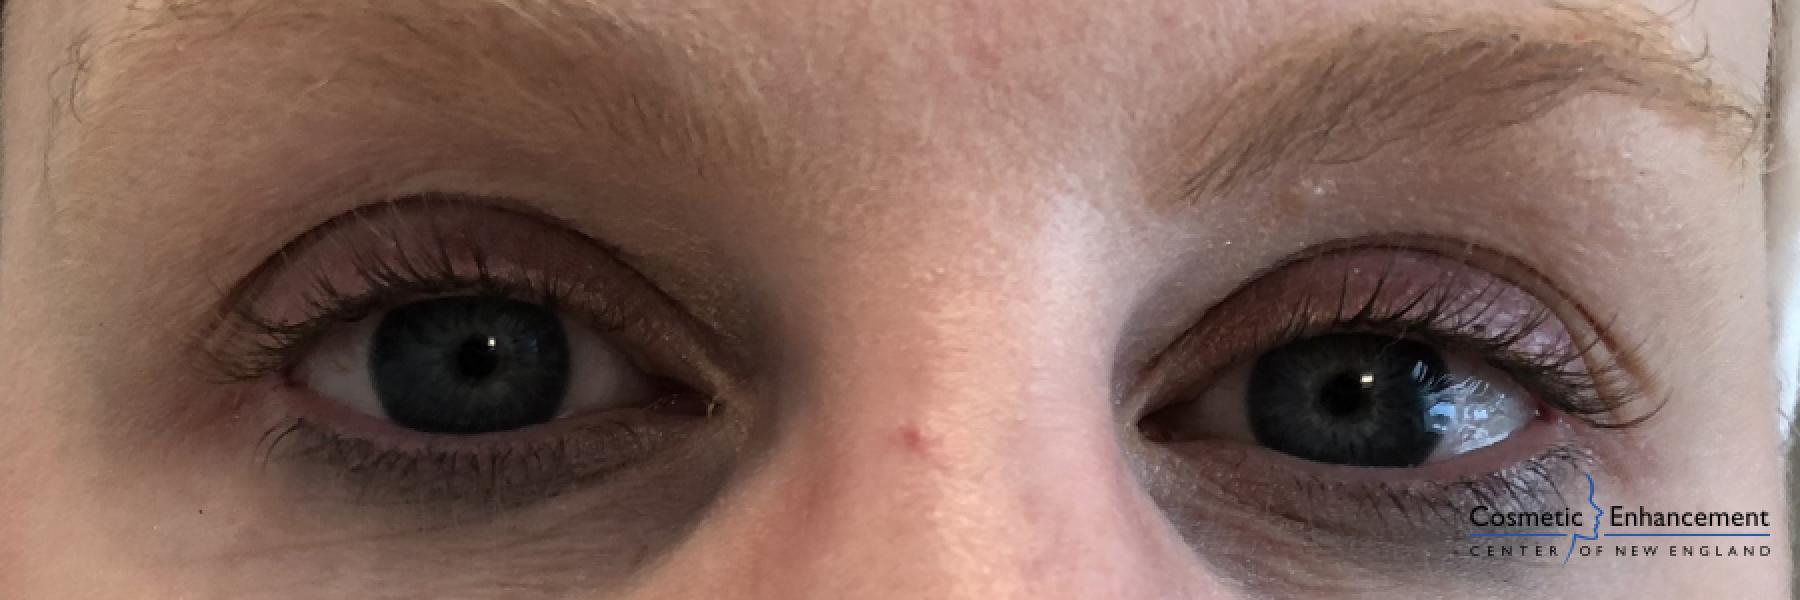 Lash Lift And Tint: Patient 2 - Before 